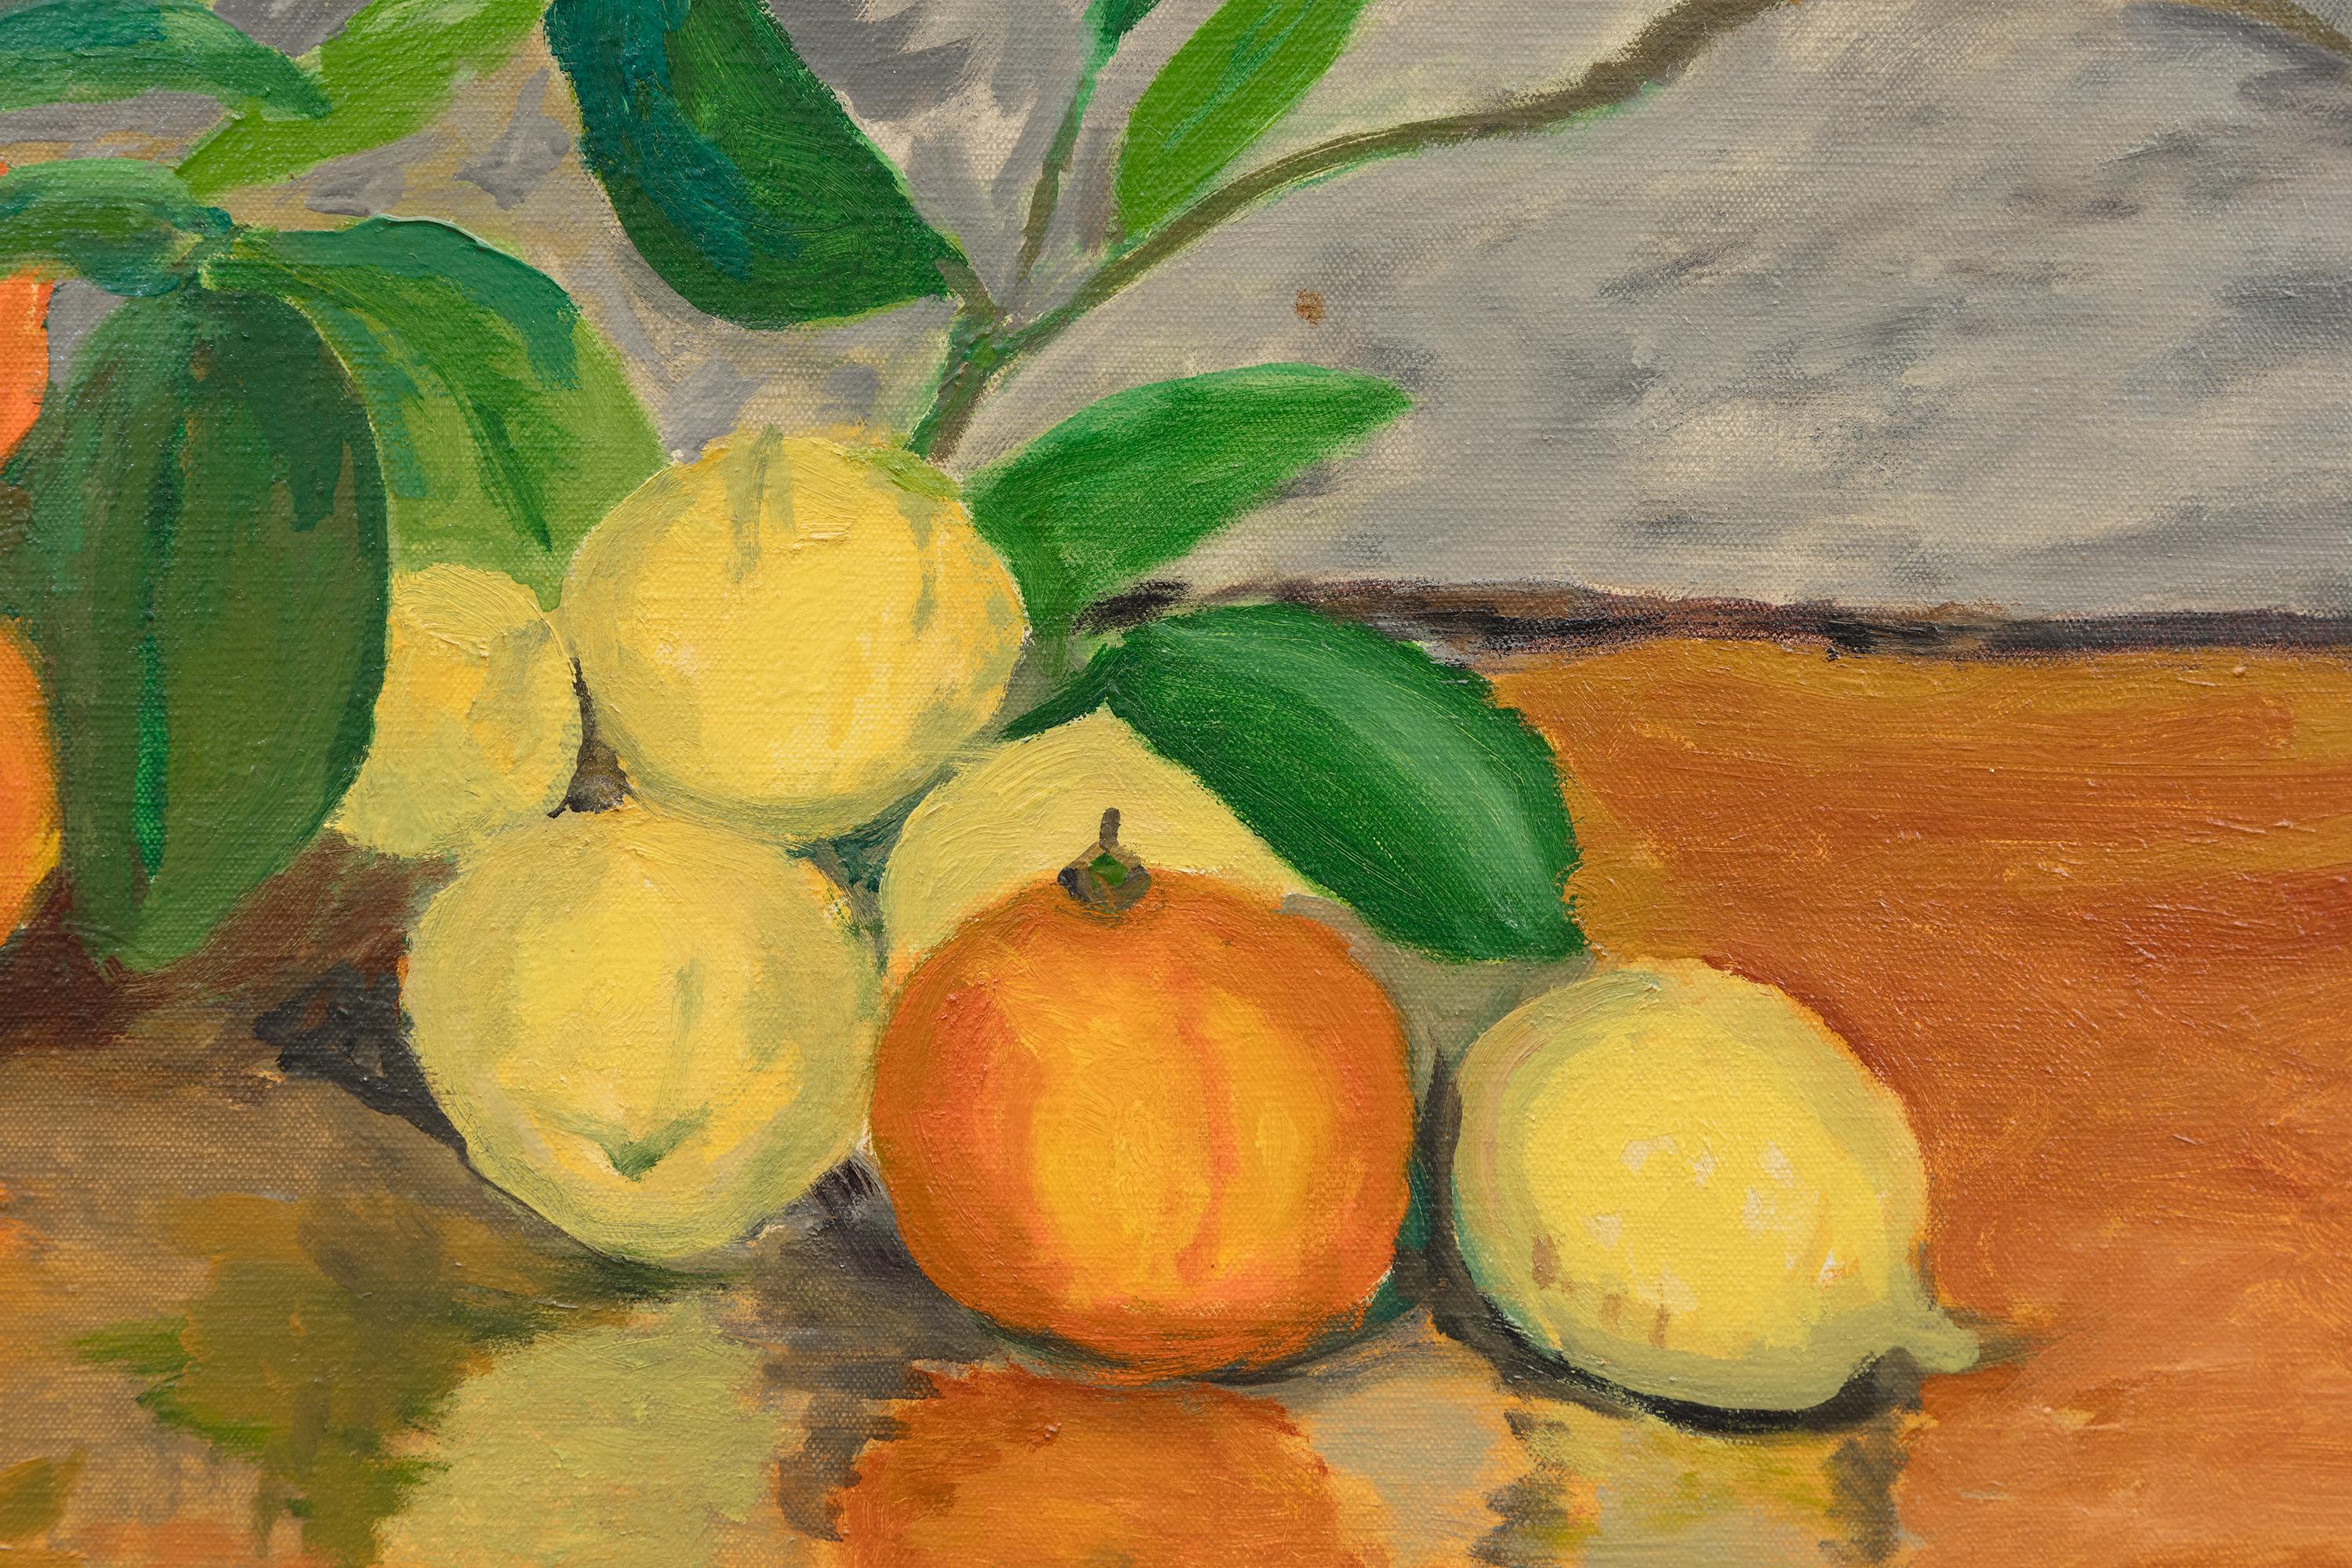 Oranges and Lemons - Impressionist Painting by Winston Churchill